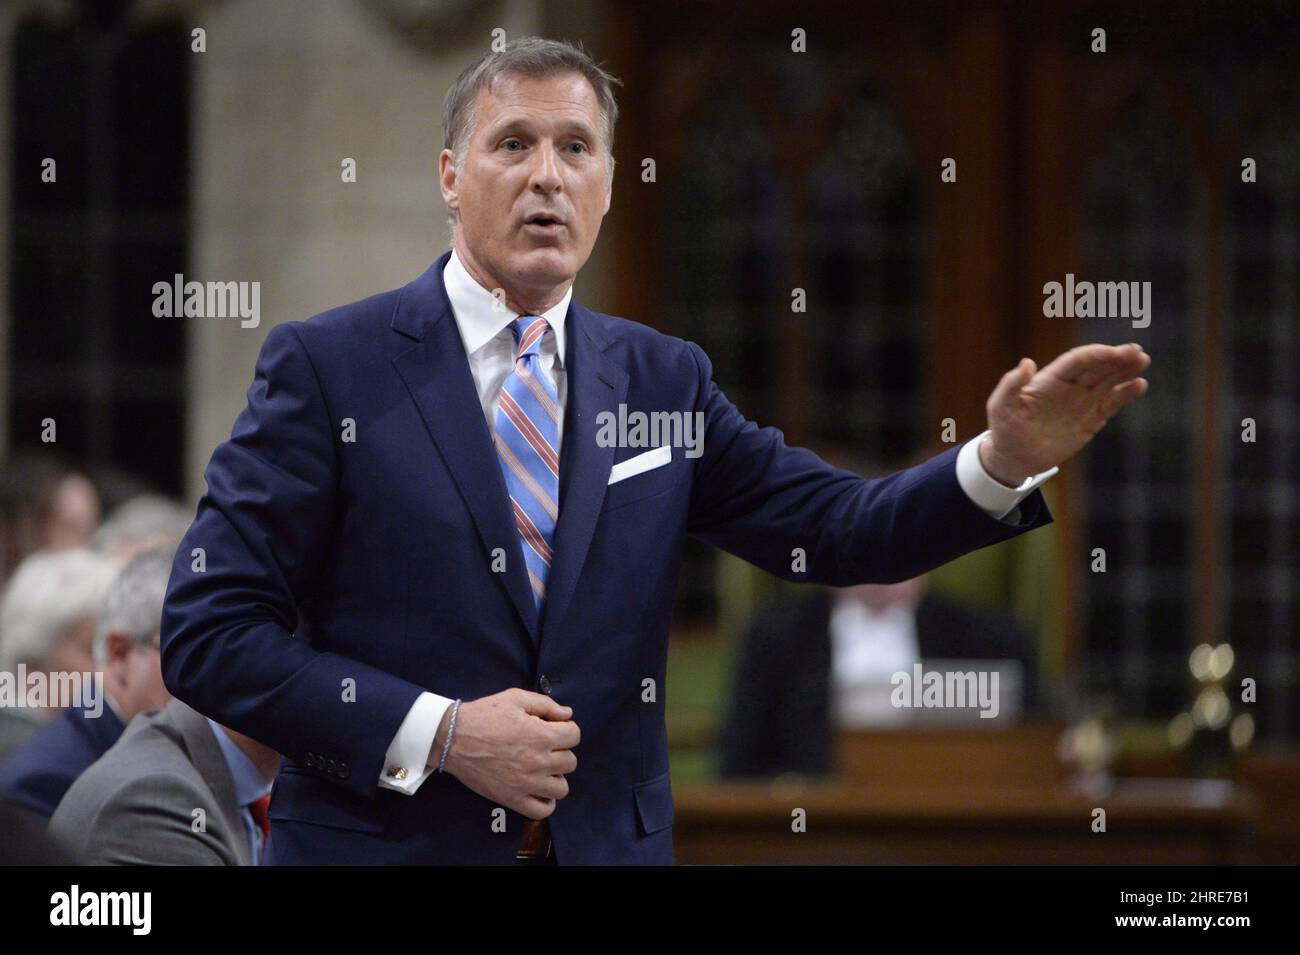 Quebec member of Parliament Maxime Bernier, who finished a close second to Andrew Scheer in last year's Conservative Party leadership vote, says he wants to know why disgraced former MP Rick Dykstra was allowed to run in the 2015 election. Bernier rises during question period in the House of Commons on Parliament Hill in Ottawa on Thursday, Sept.28, 2017. THE CANADIAN PRESS/Adrian Wyld Stock Photo